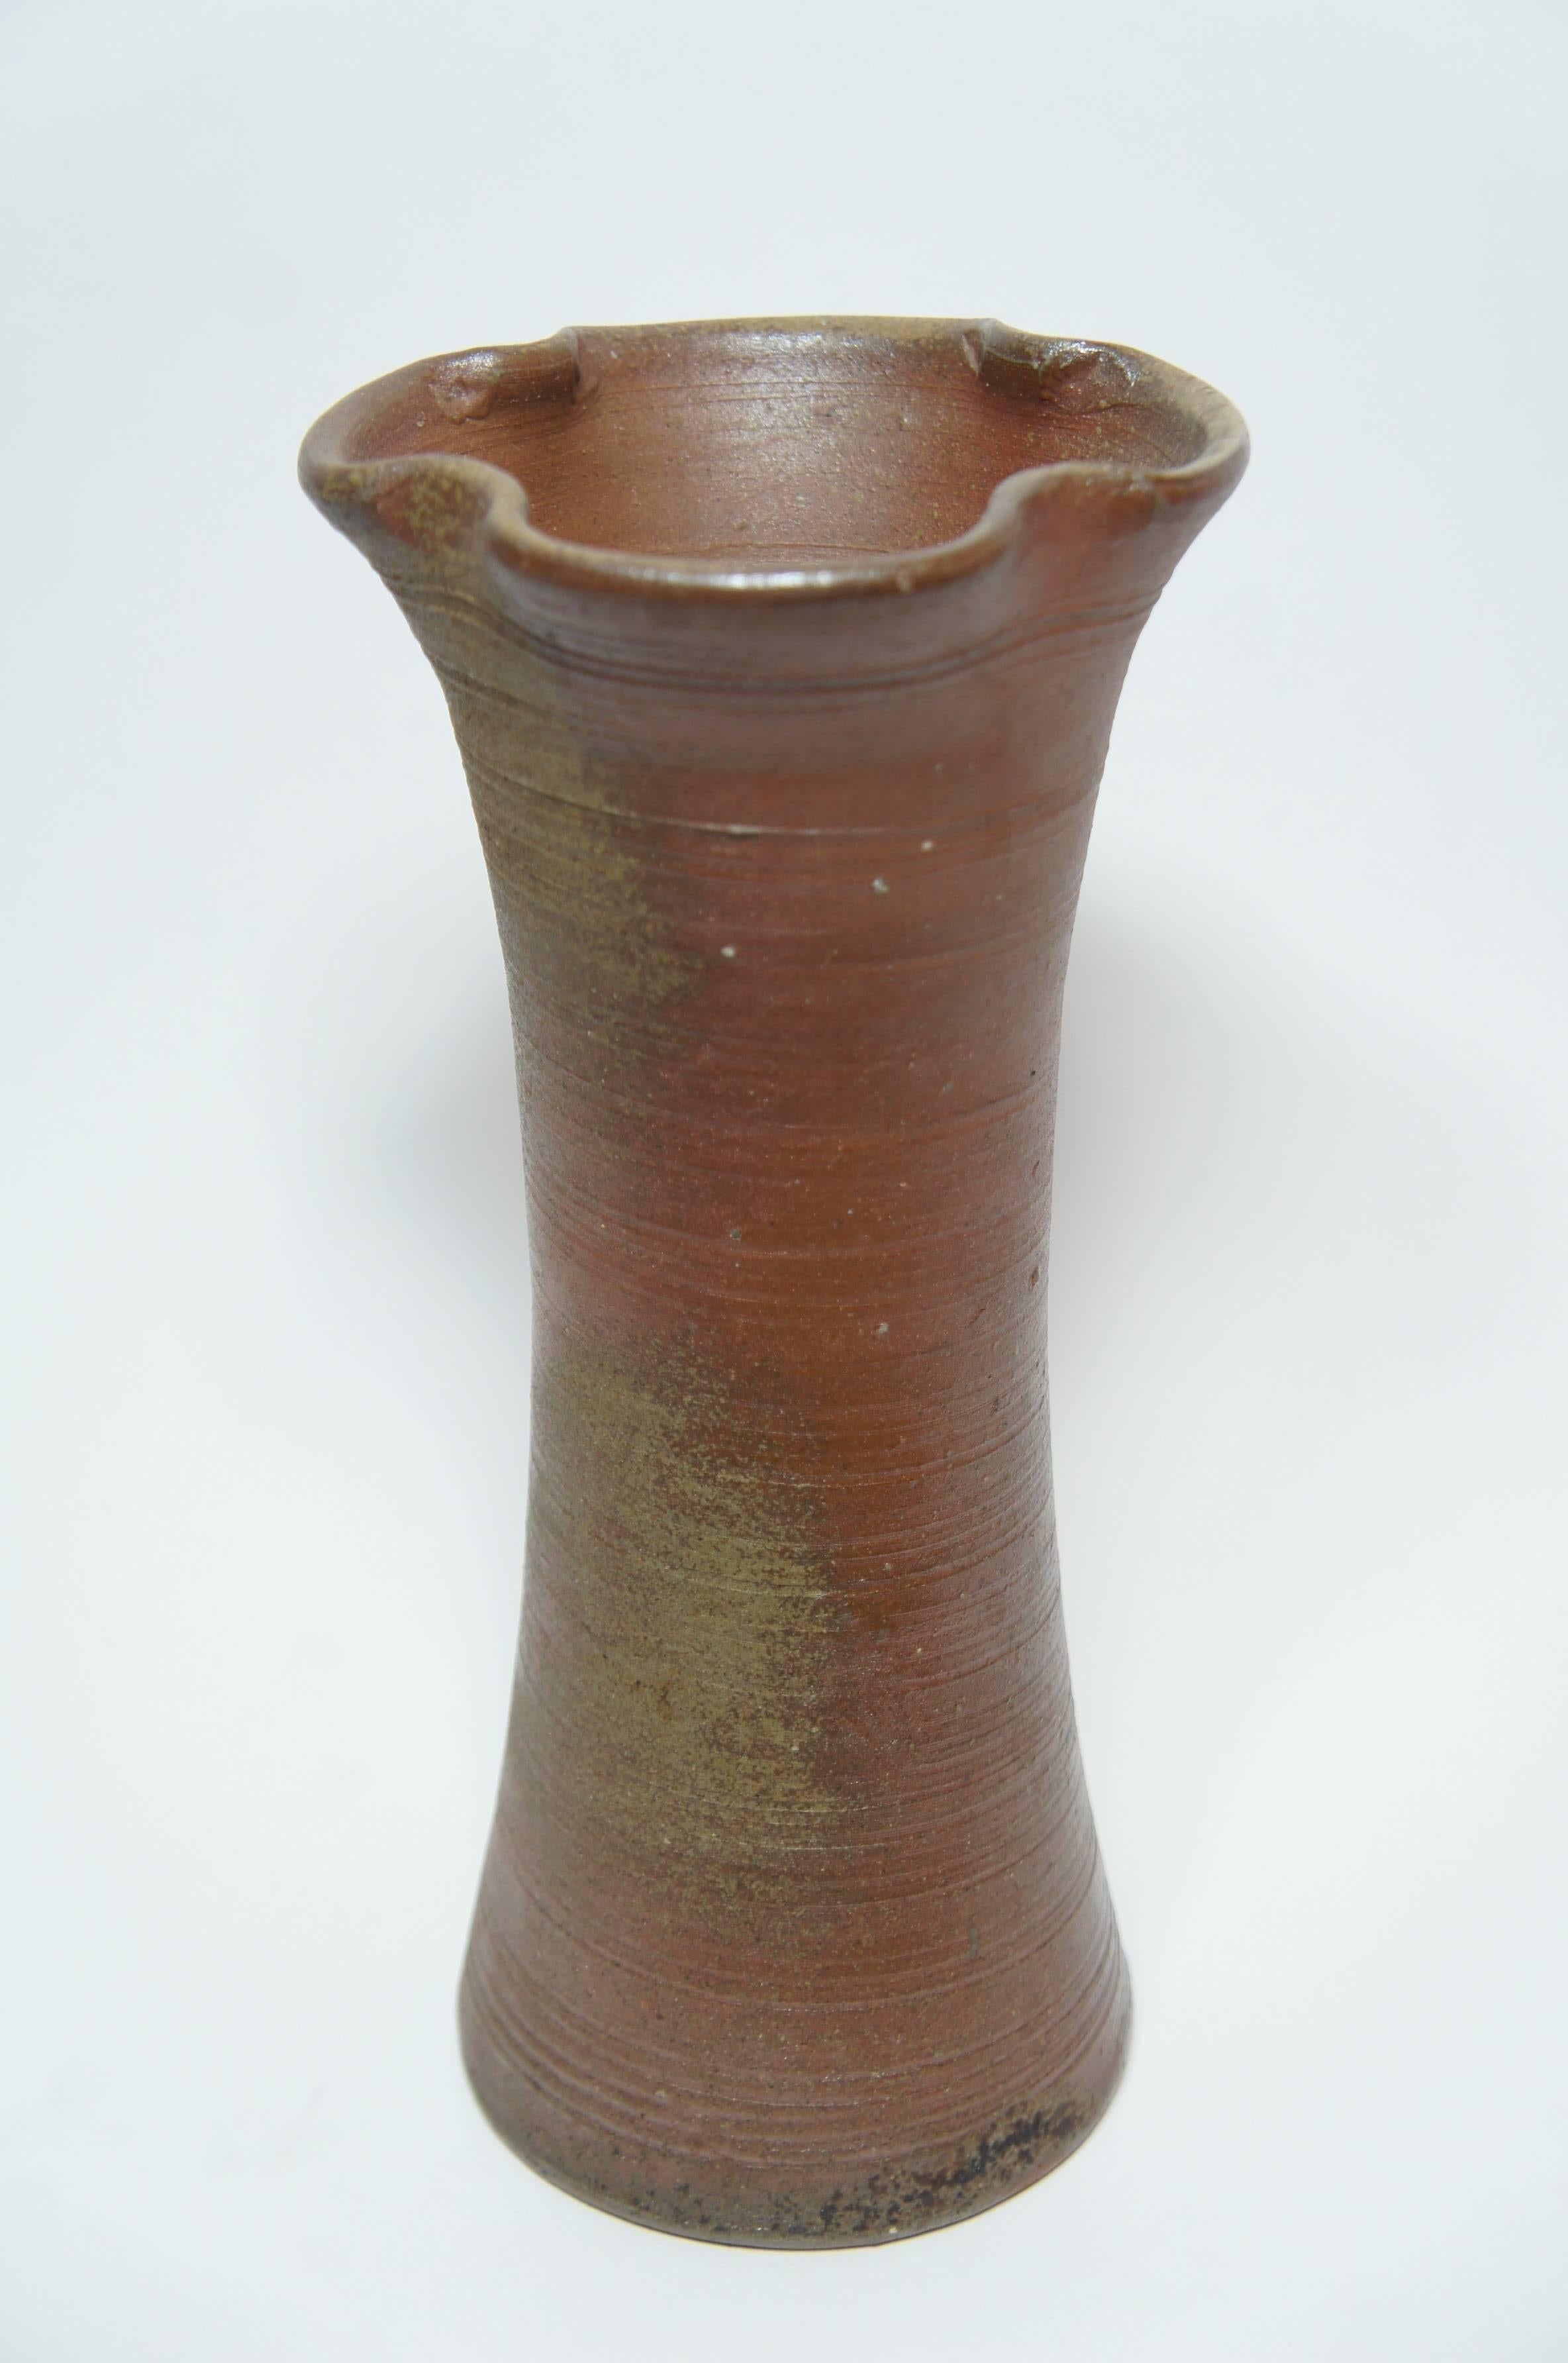 Bizen Ware is pottery and tunnel kiln made in Bizen area, Japan. The kiln is one of the six ancient Kilns in Japan.

It is characterized by manufacturing method unglazed. 



